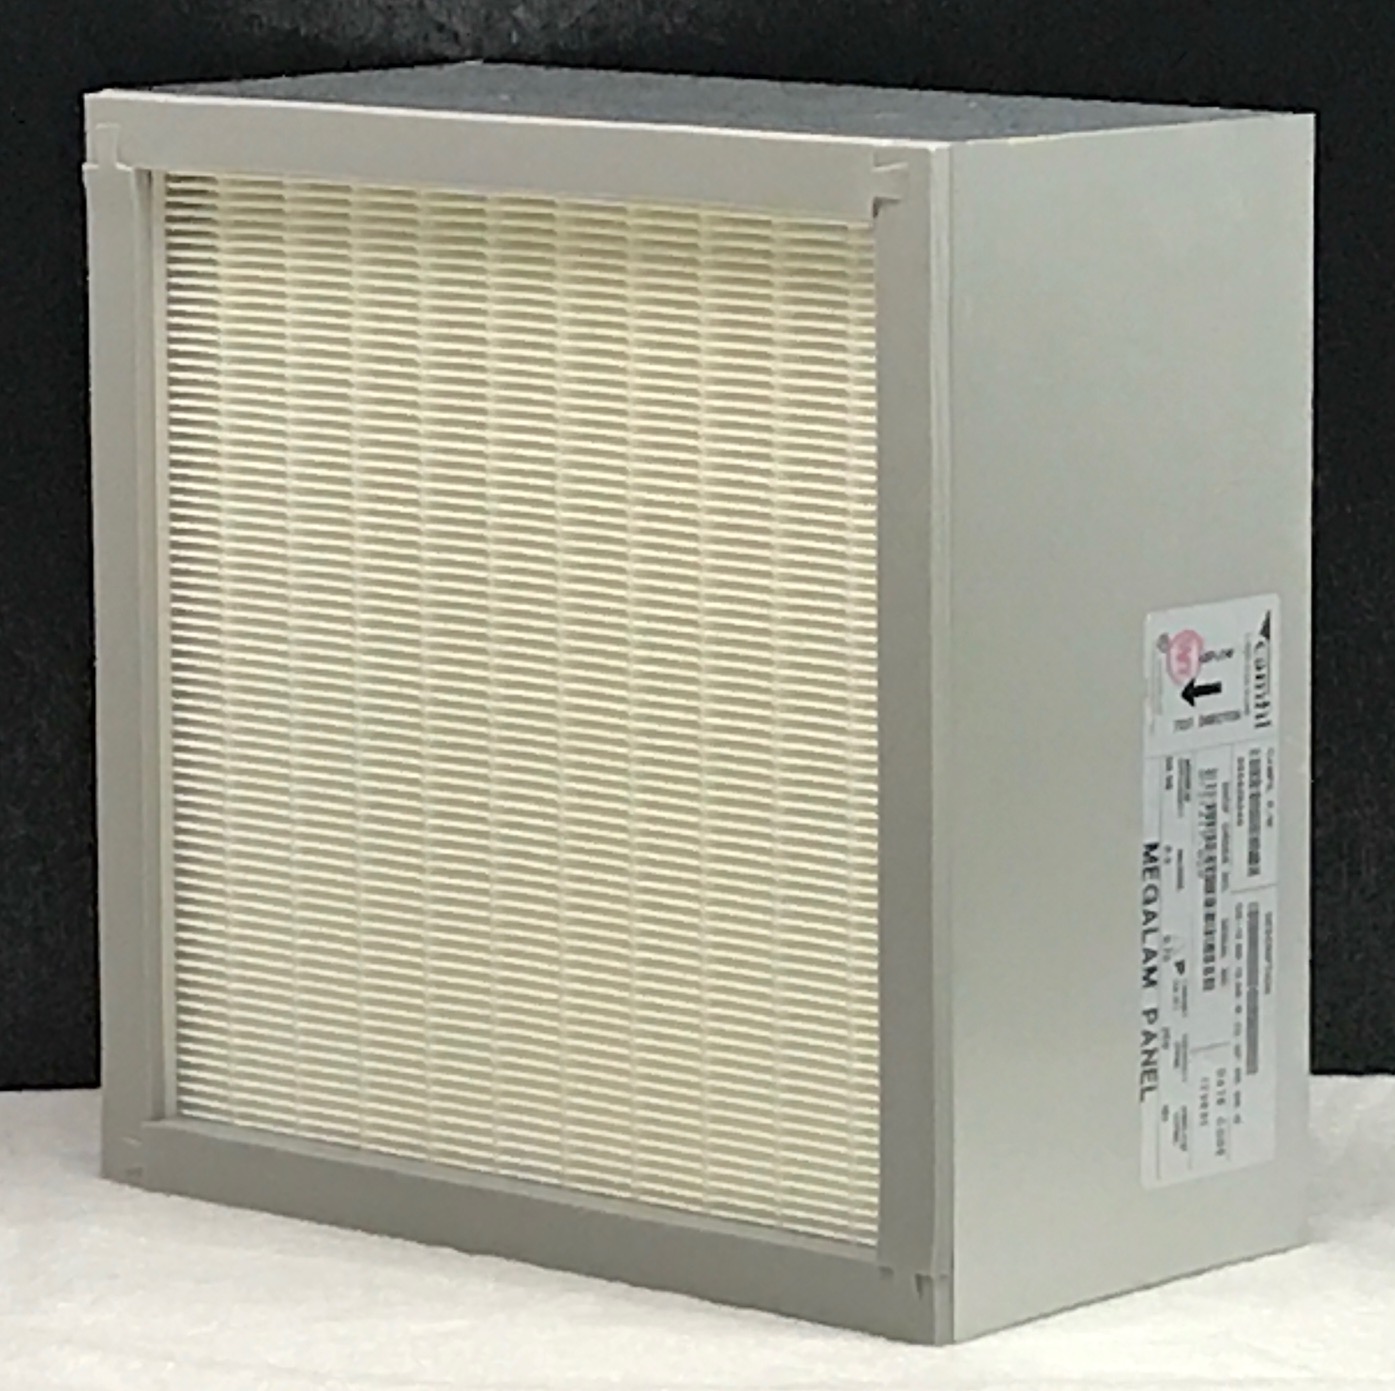 Replacement H-14 HEPA Filter for Pure Air Systems 1200HS/2000HS